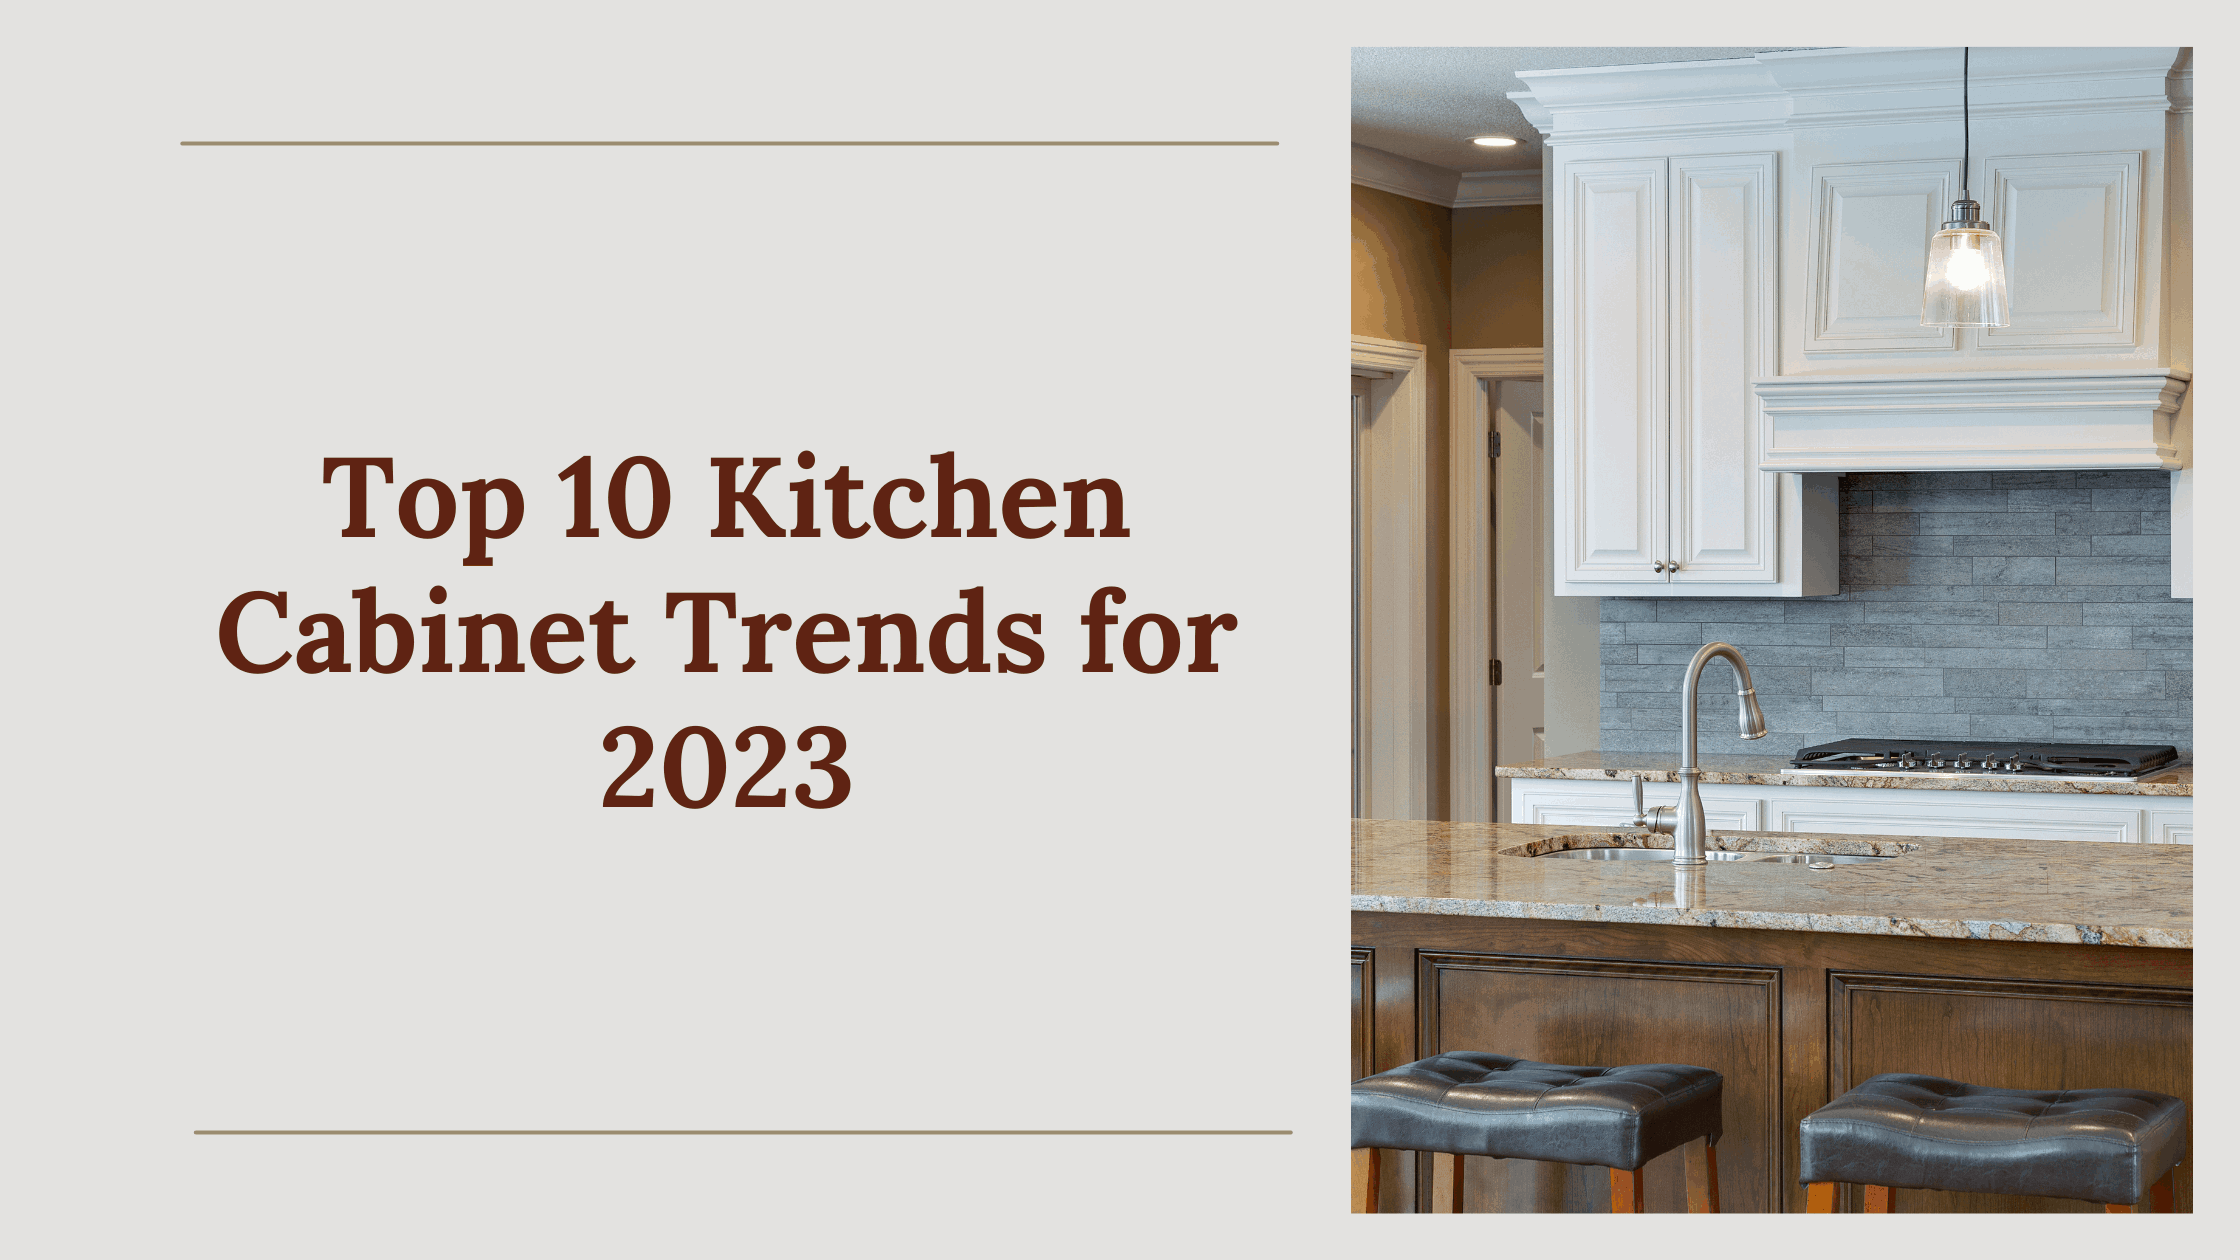 Top 10 Kitchen Cabinet Trends for 2023